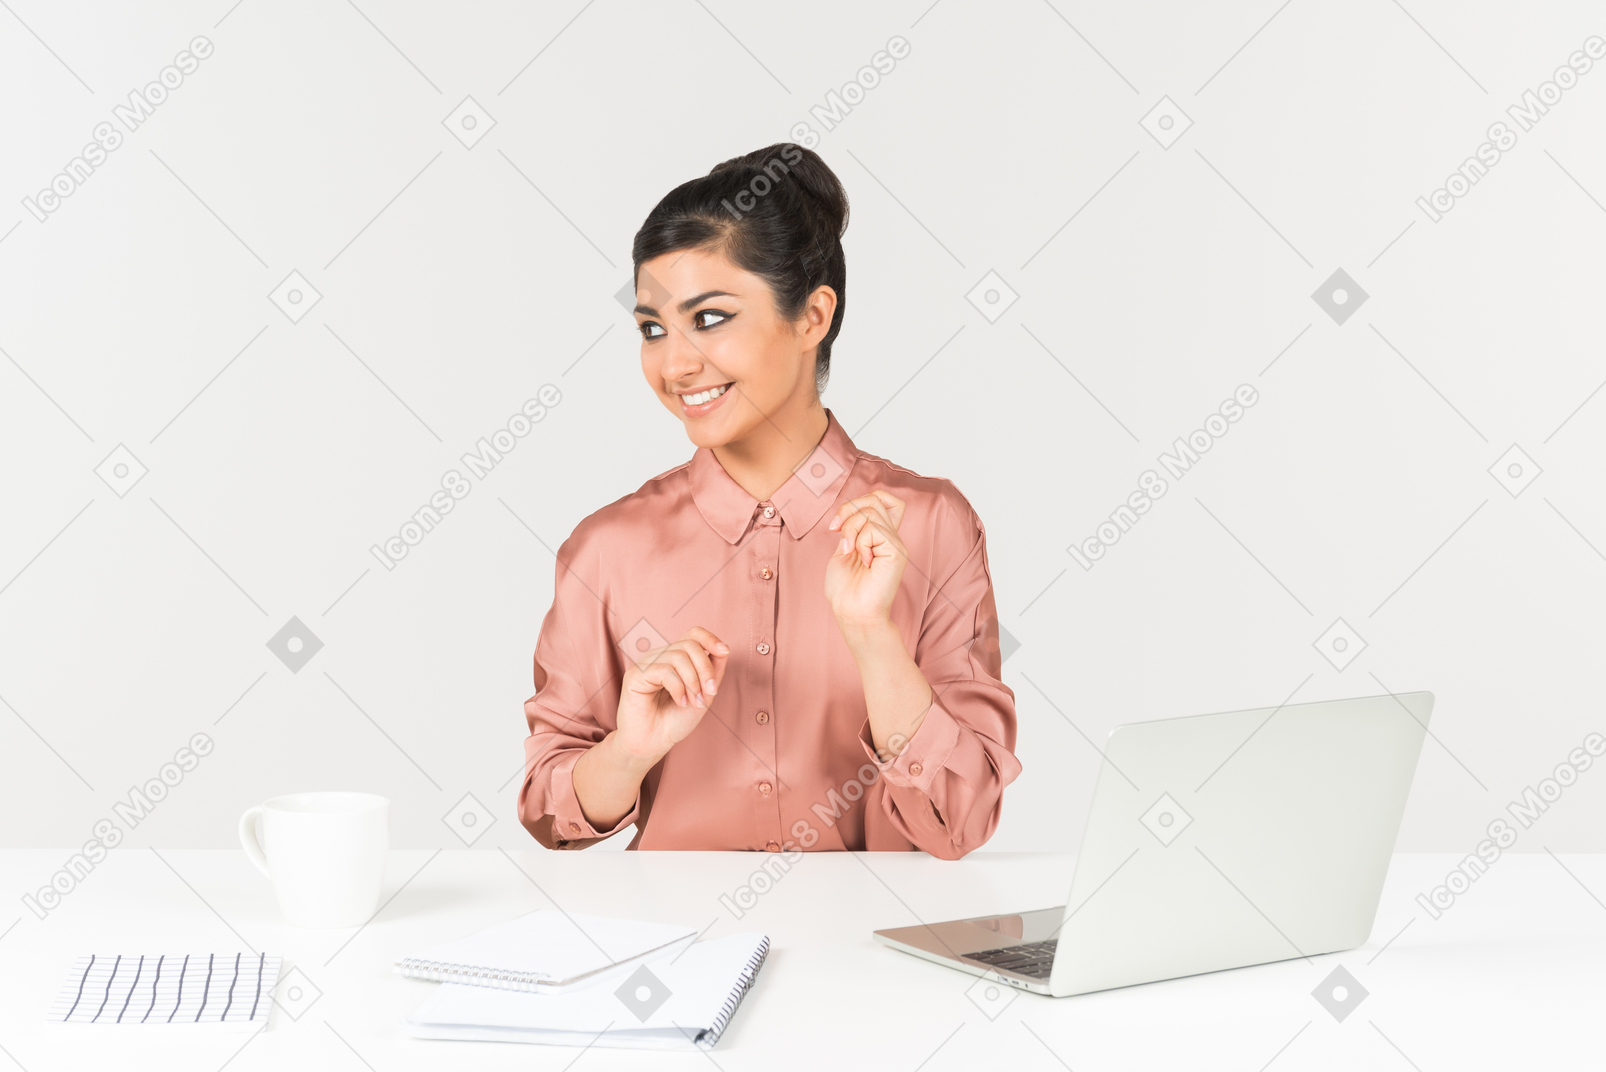 Young indian woman sitting at the office desk and looking aside